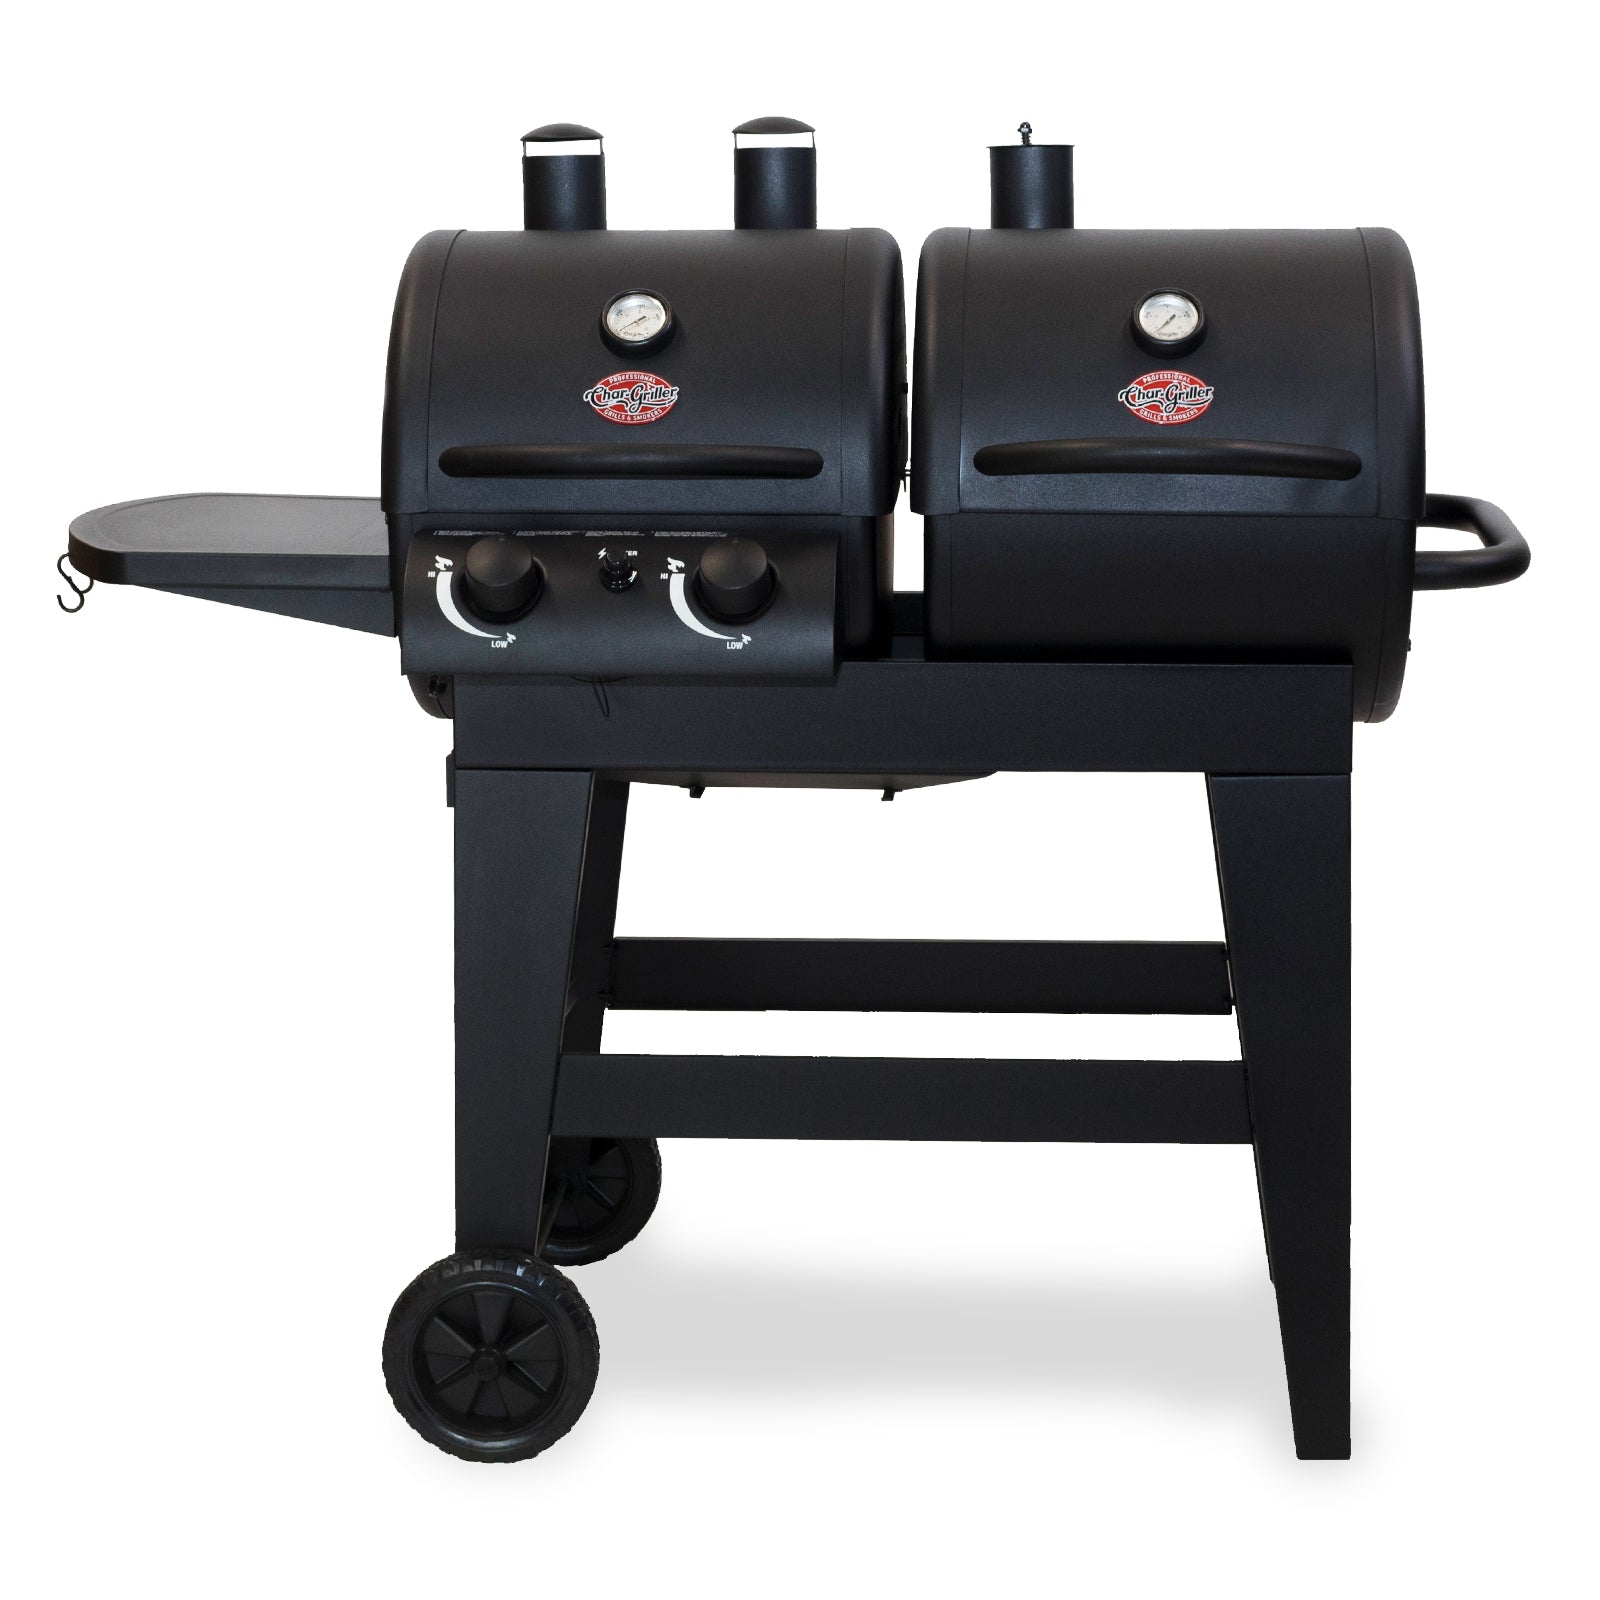 Dual Function 2-Burner Gas & Charcoal Grill Char-Griller